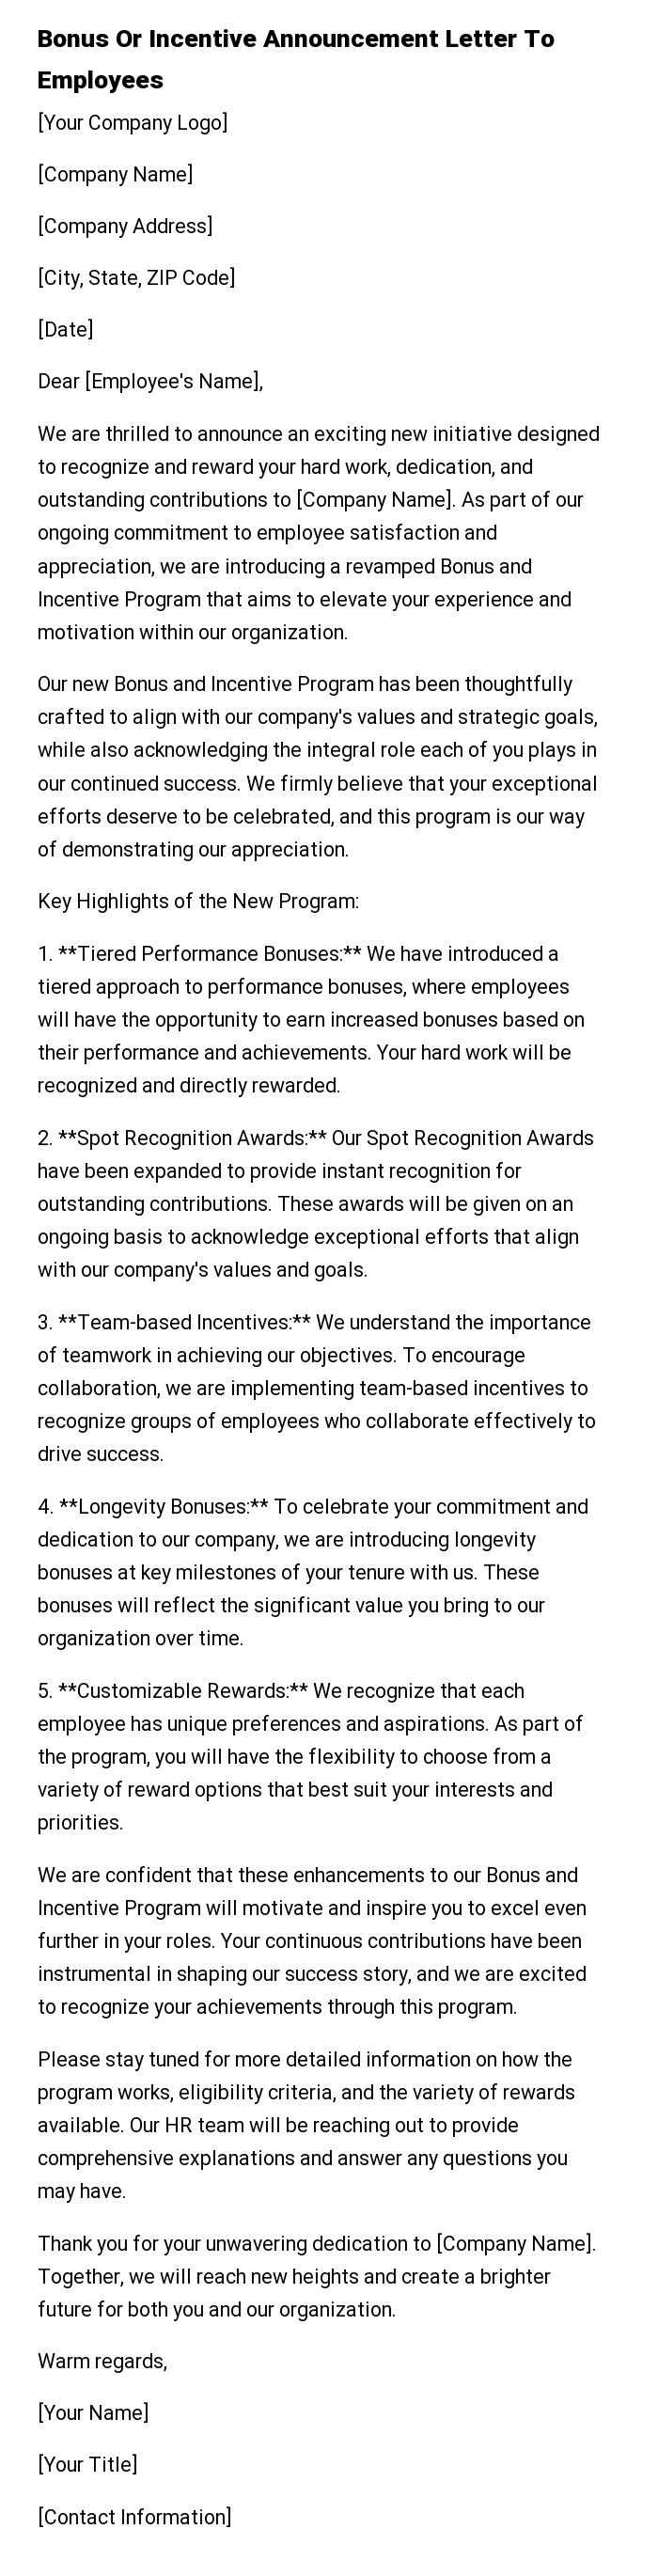 Bonus Or Incentive Announcement Letter To Employees